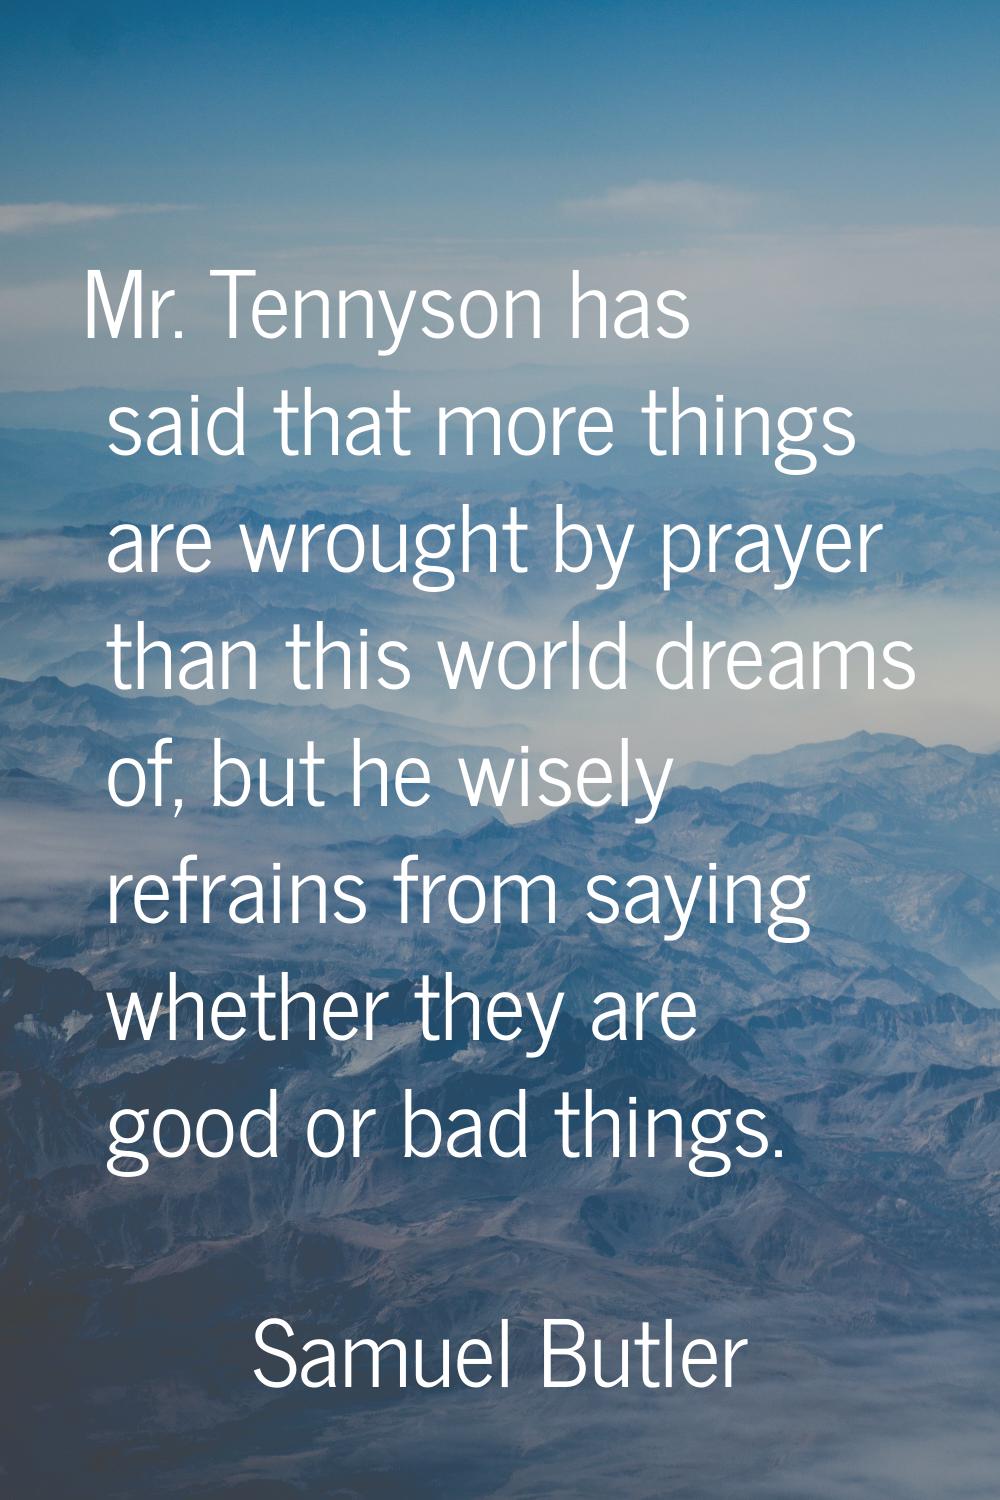 Mr. Tennyson has said that more things are wrought by prayer than this world dreams of, but he wise